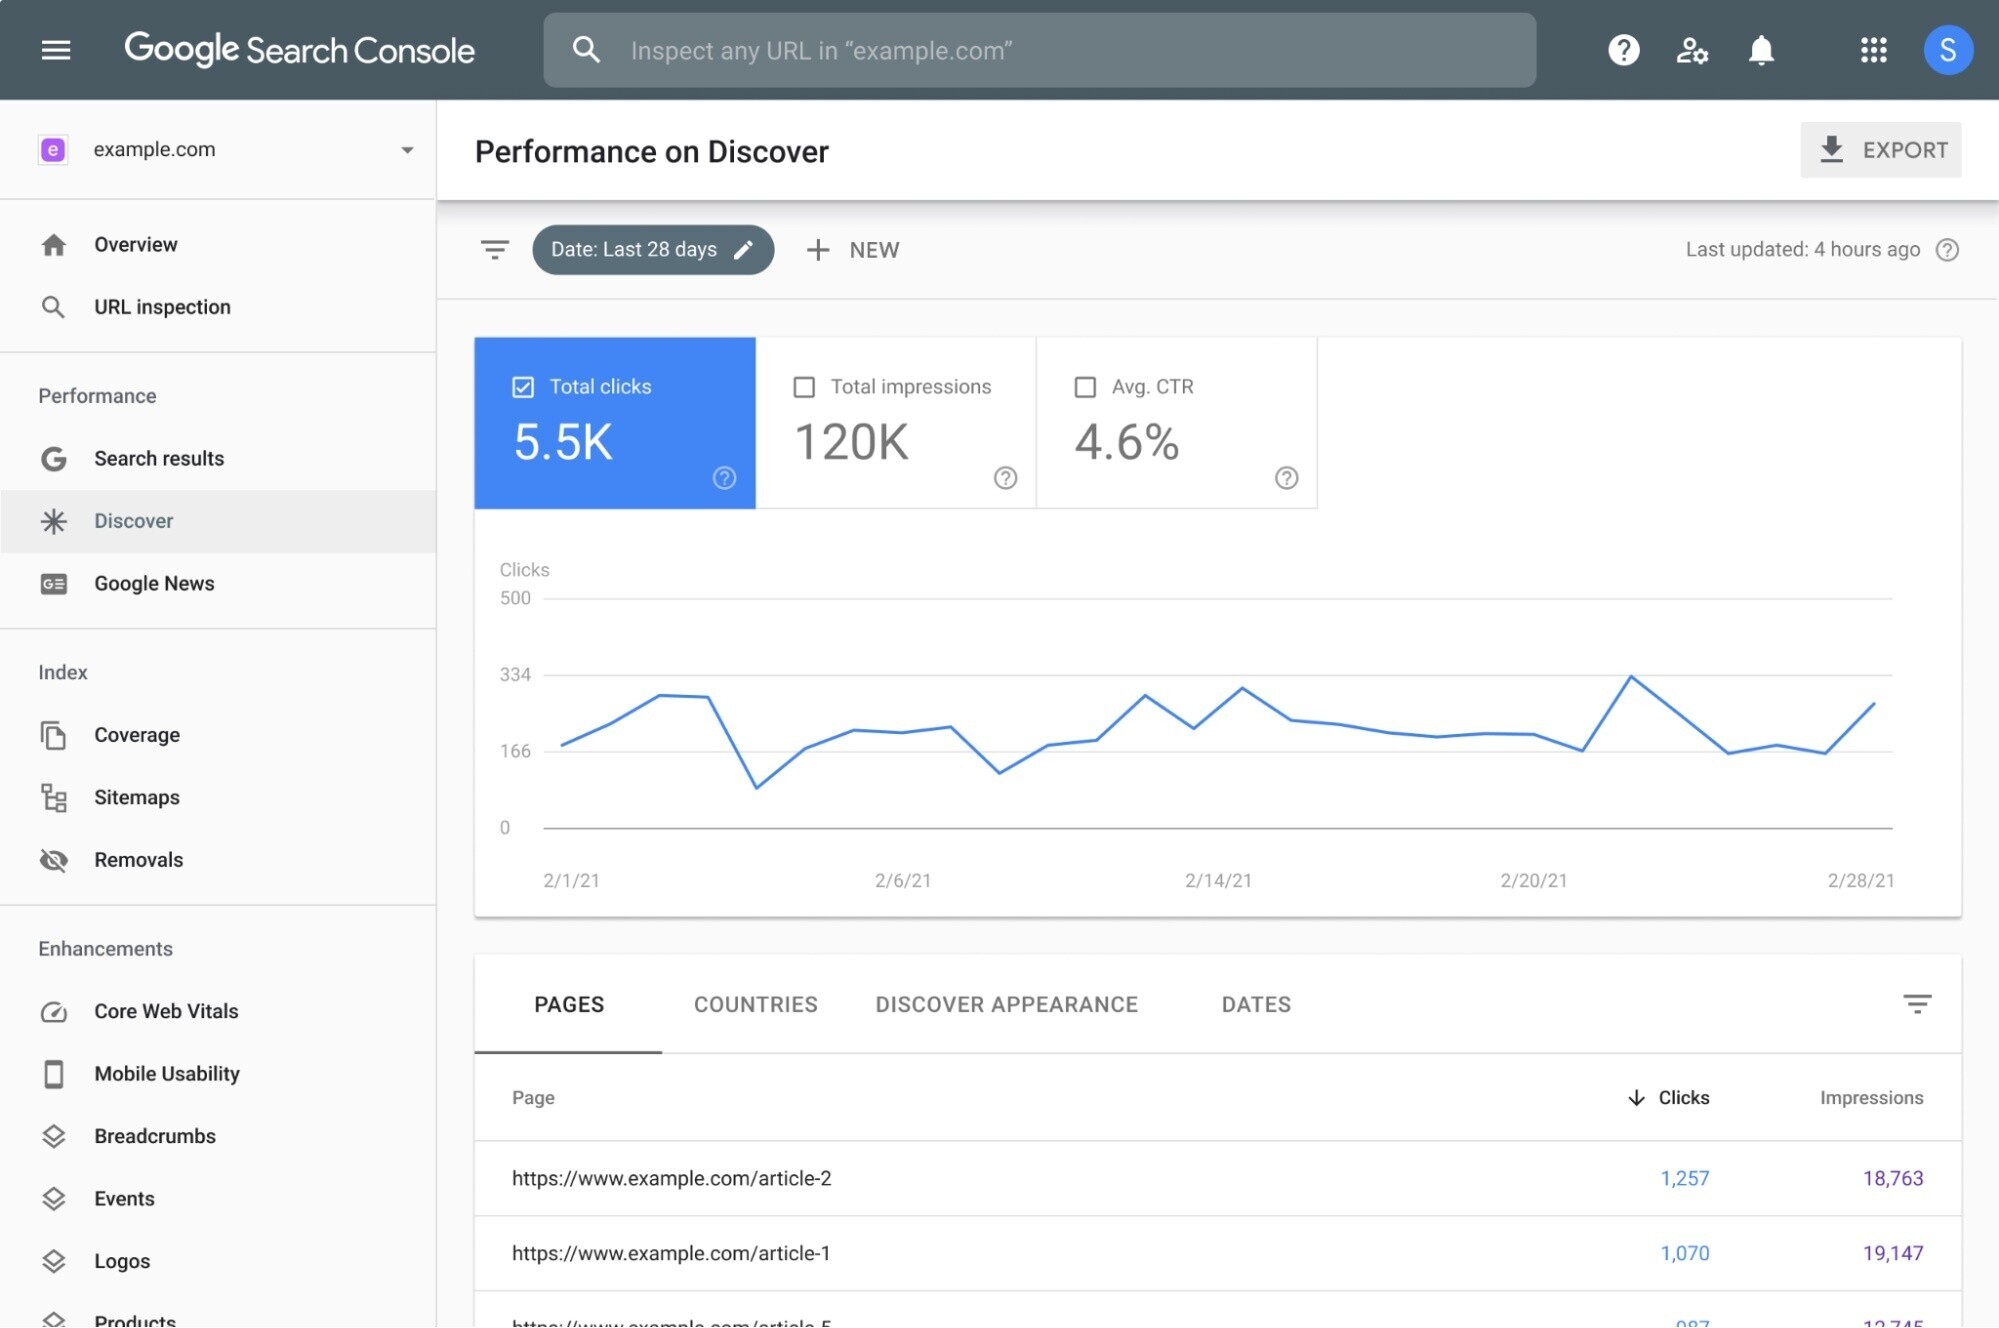 Google Search Console displays data about a website's performance, clicks, impressions, and click-through rate